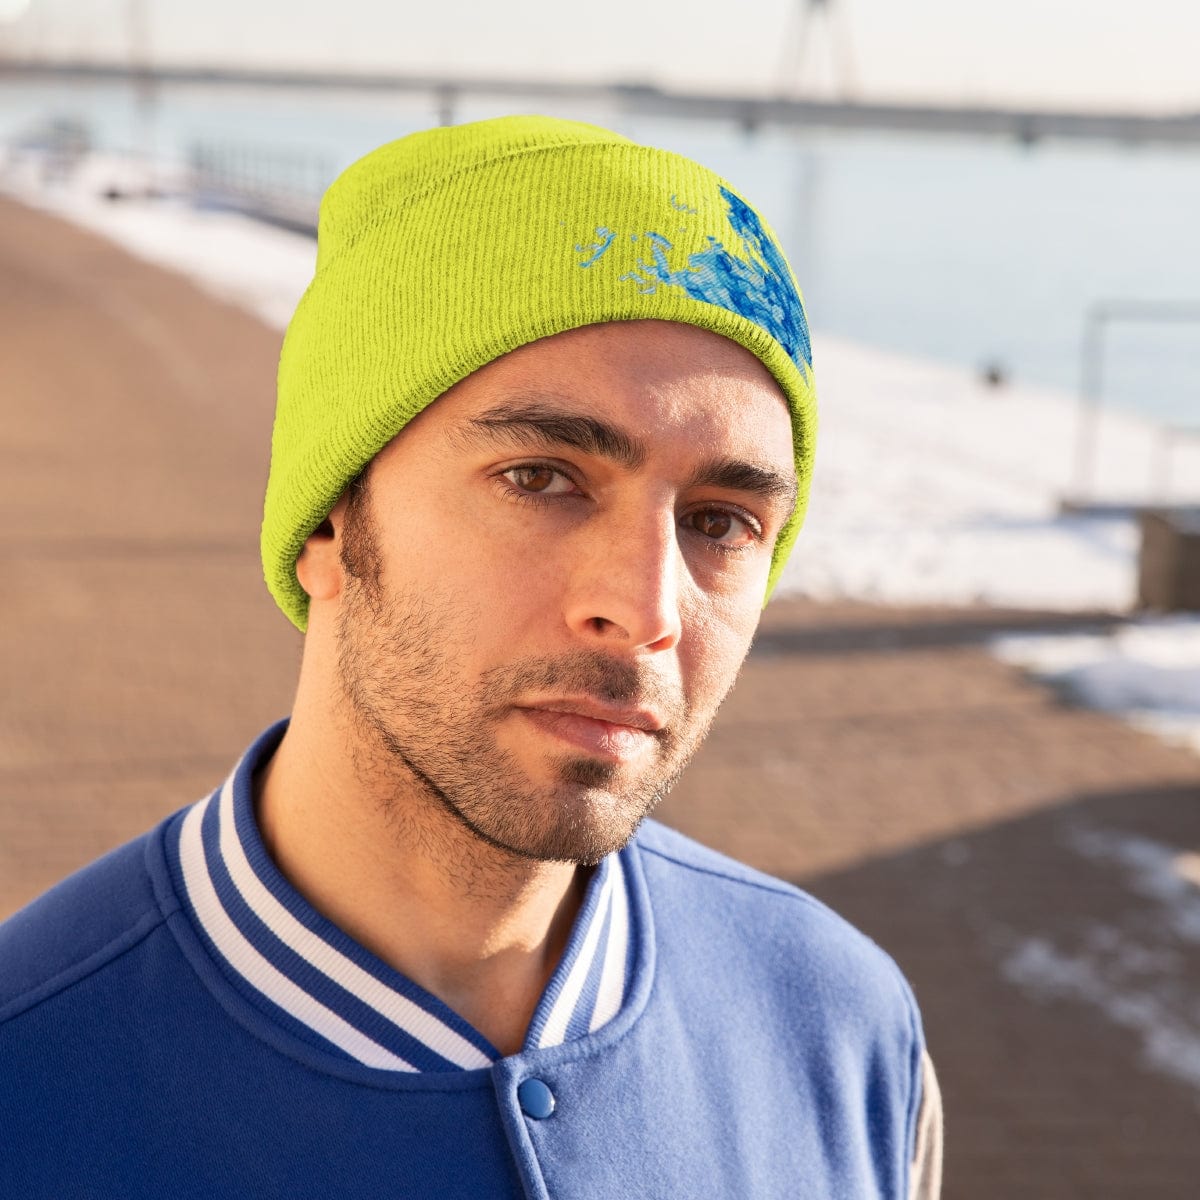 The Neon Pink Big Ocean Wave Beanie Knitted Hat